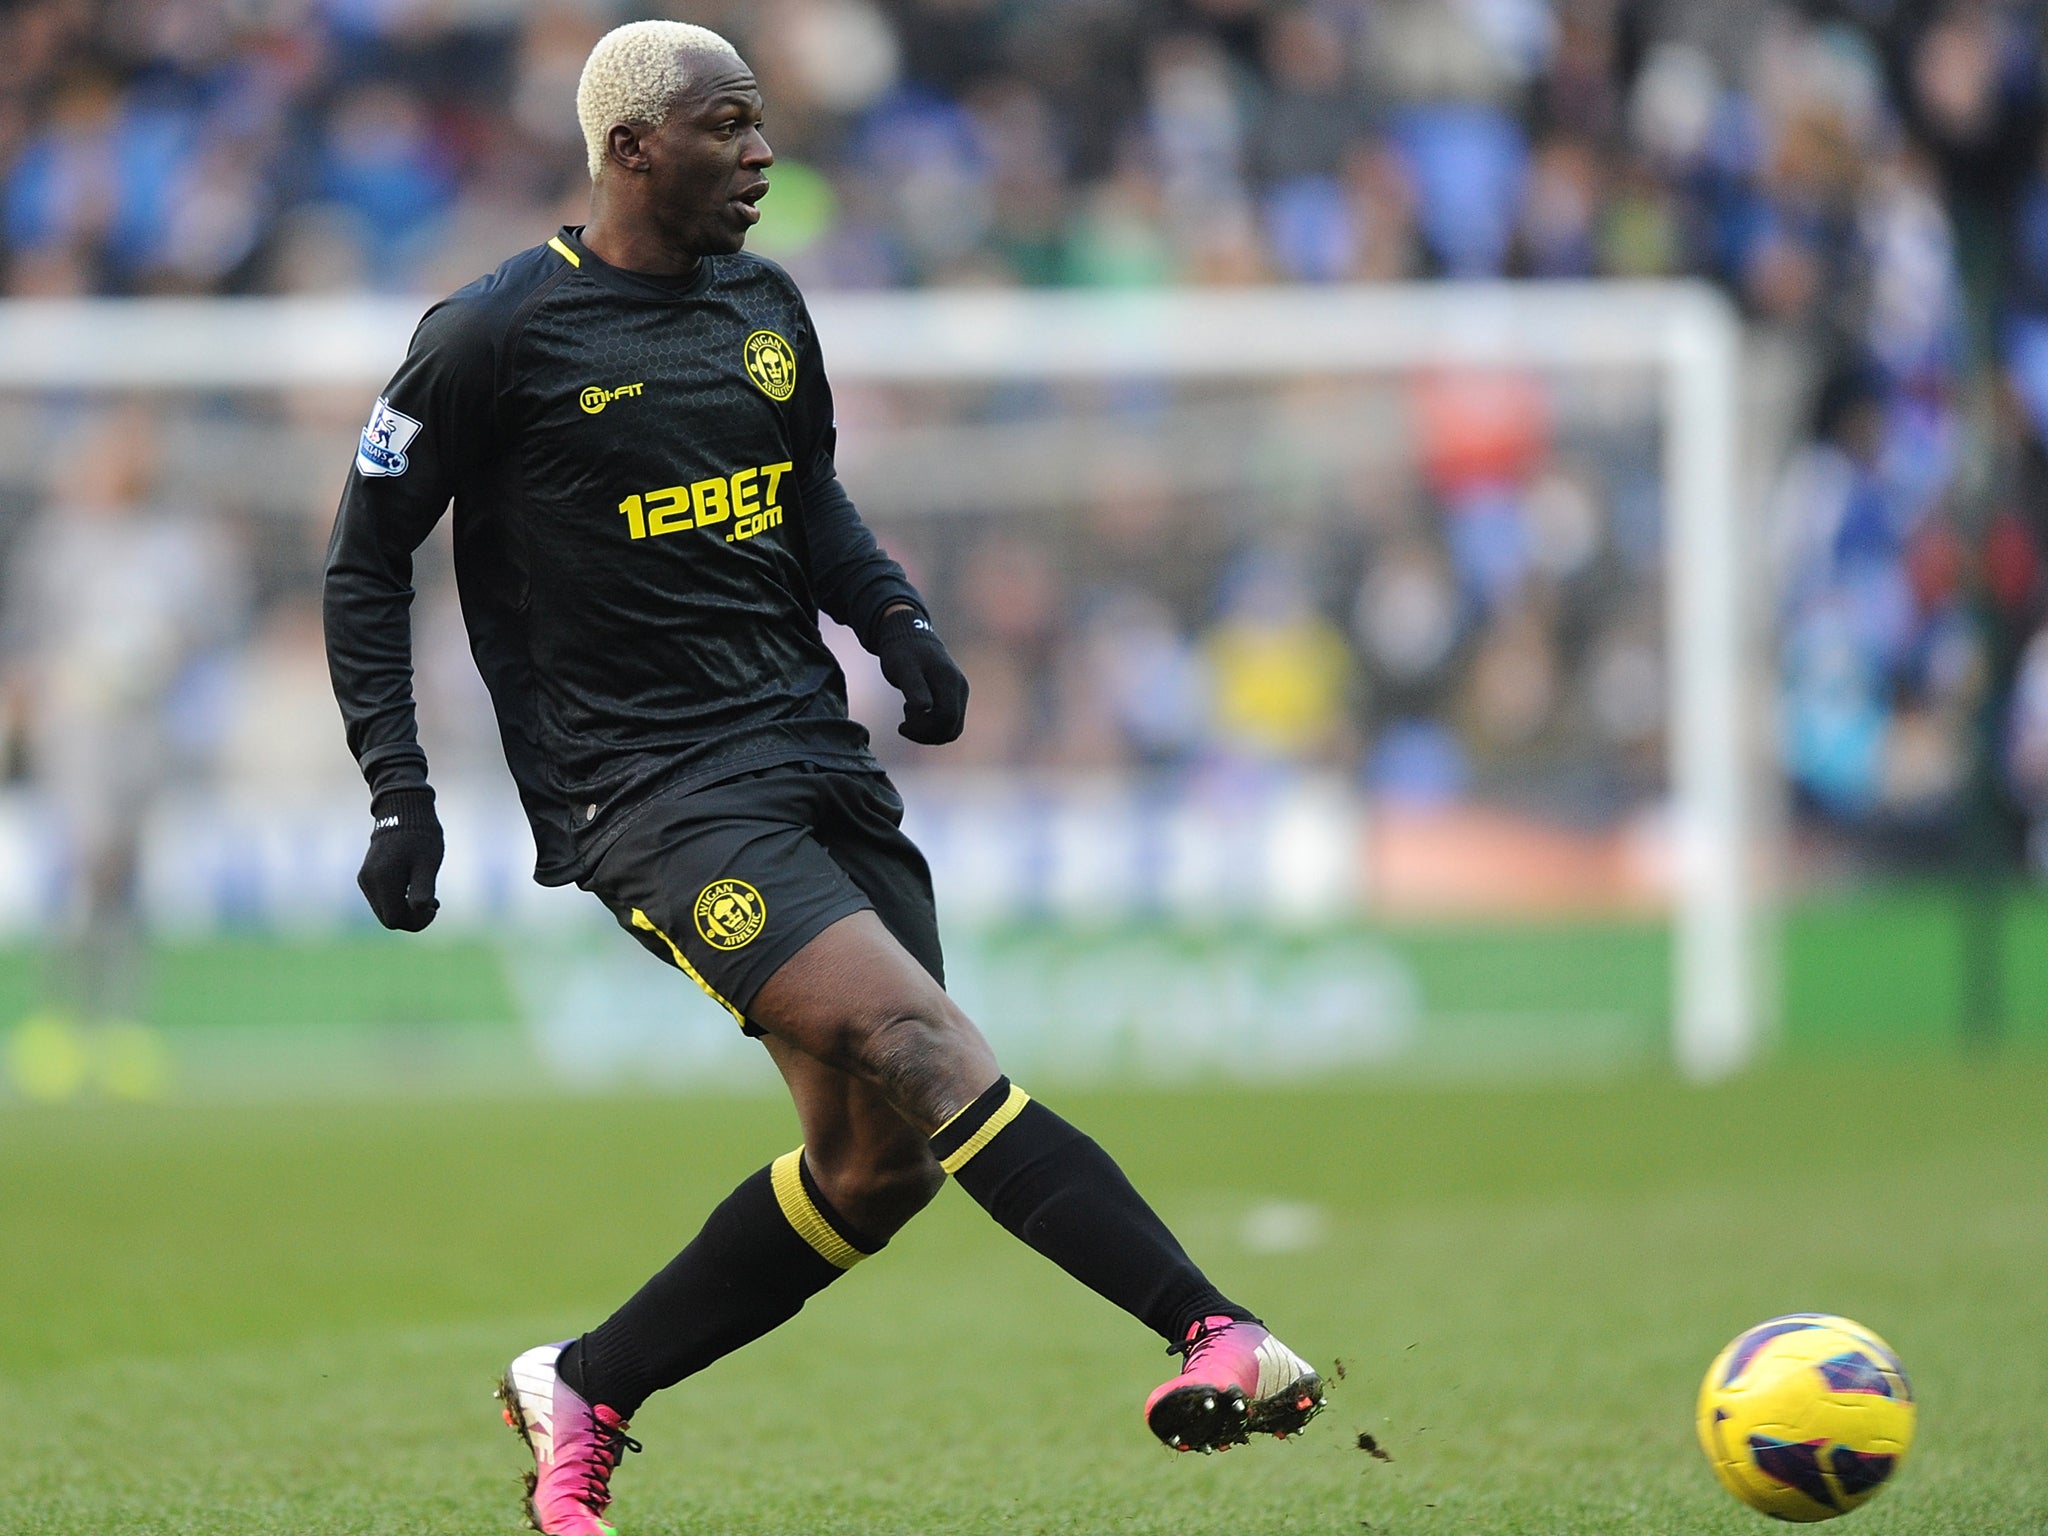 Arouna Kone looks set to join up with his former coach Roberto Martinez at Everton